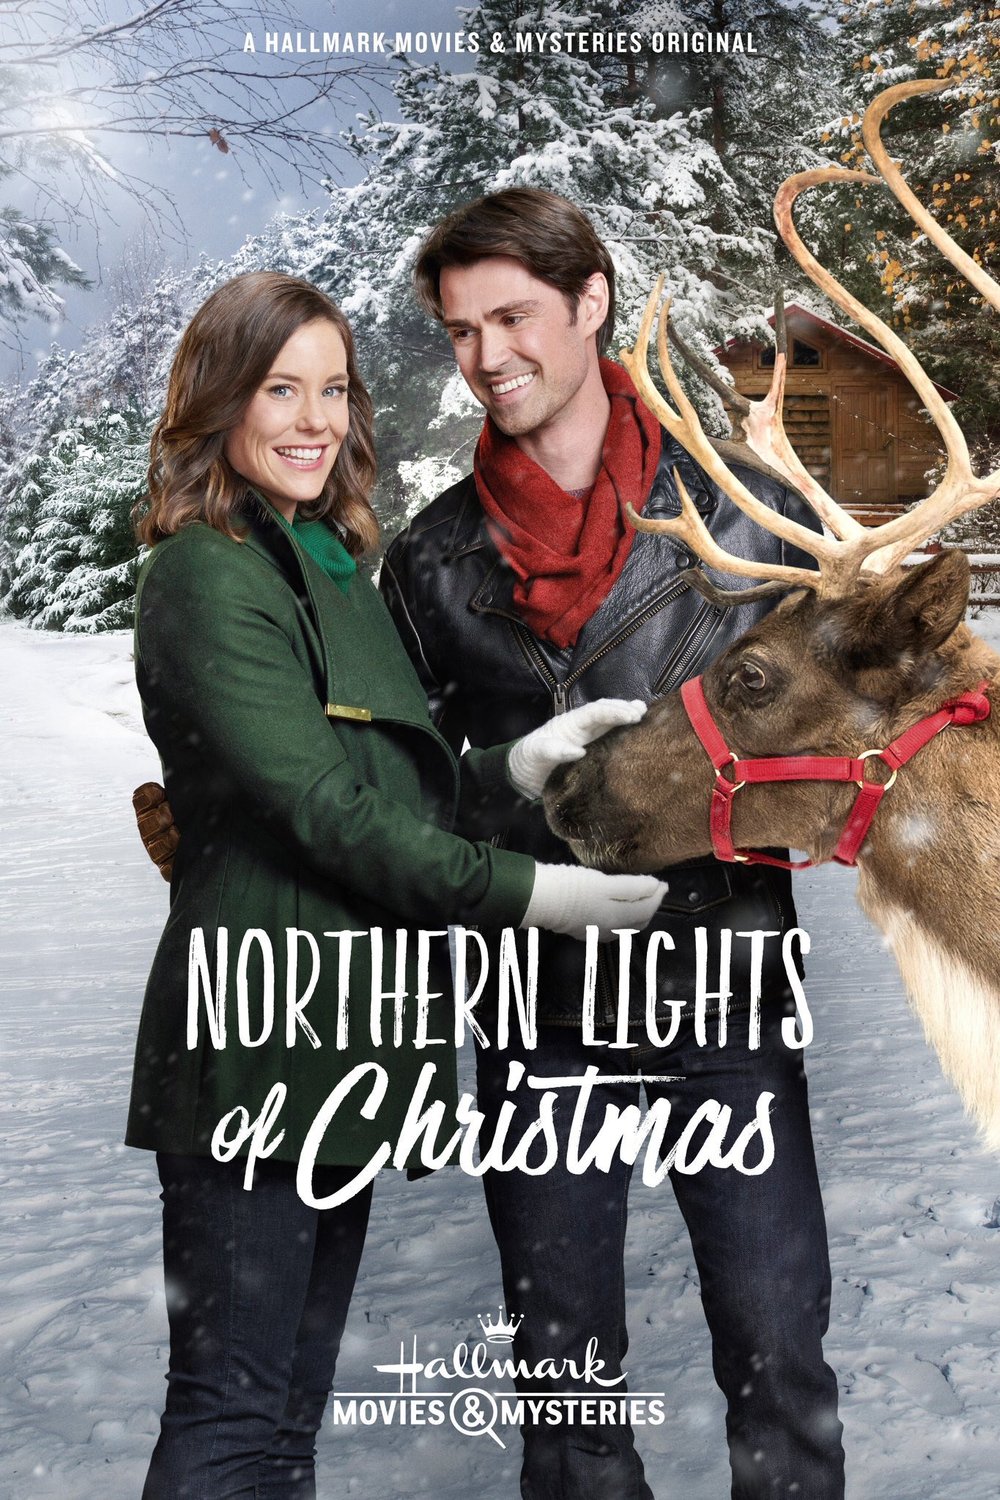 Poster of the movie Northern Lights of Christmas